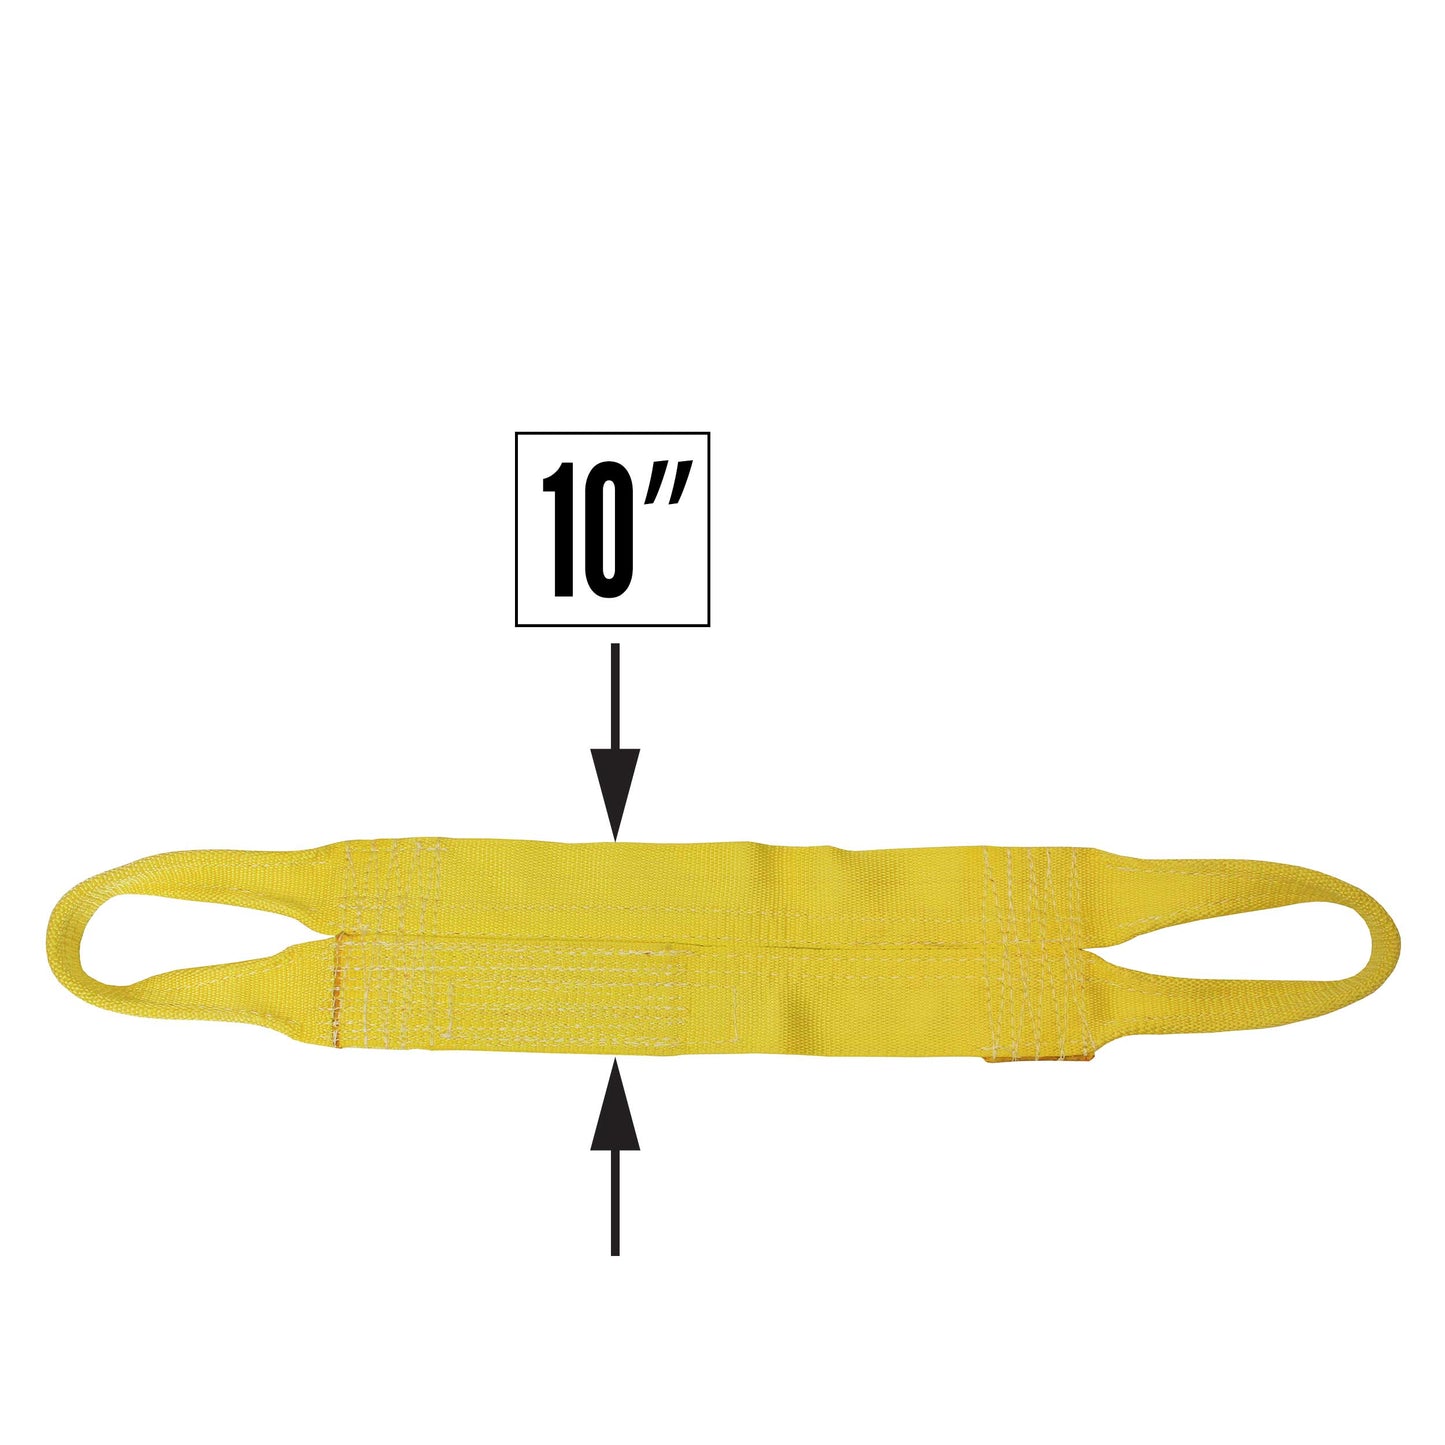 Nylon Lifting Sling Continuous Eye Wide 10 inch x 10 foot 1ply image 3 of 3